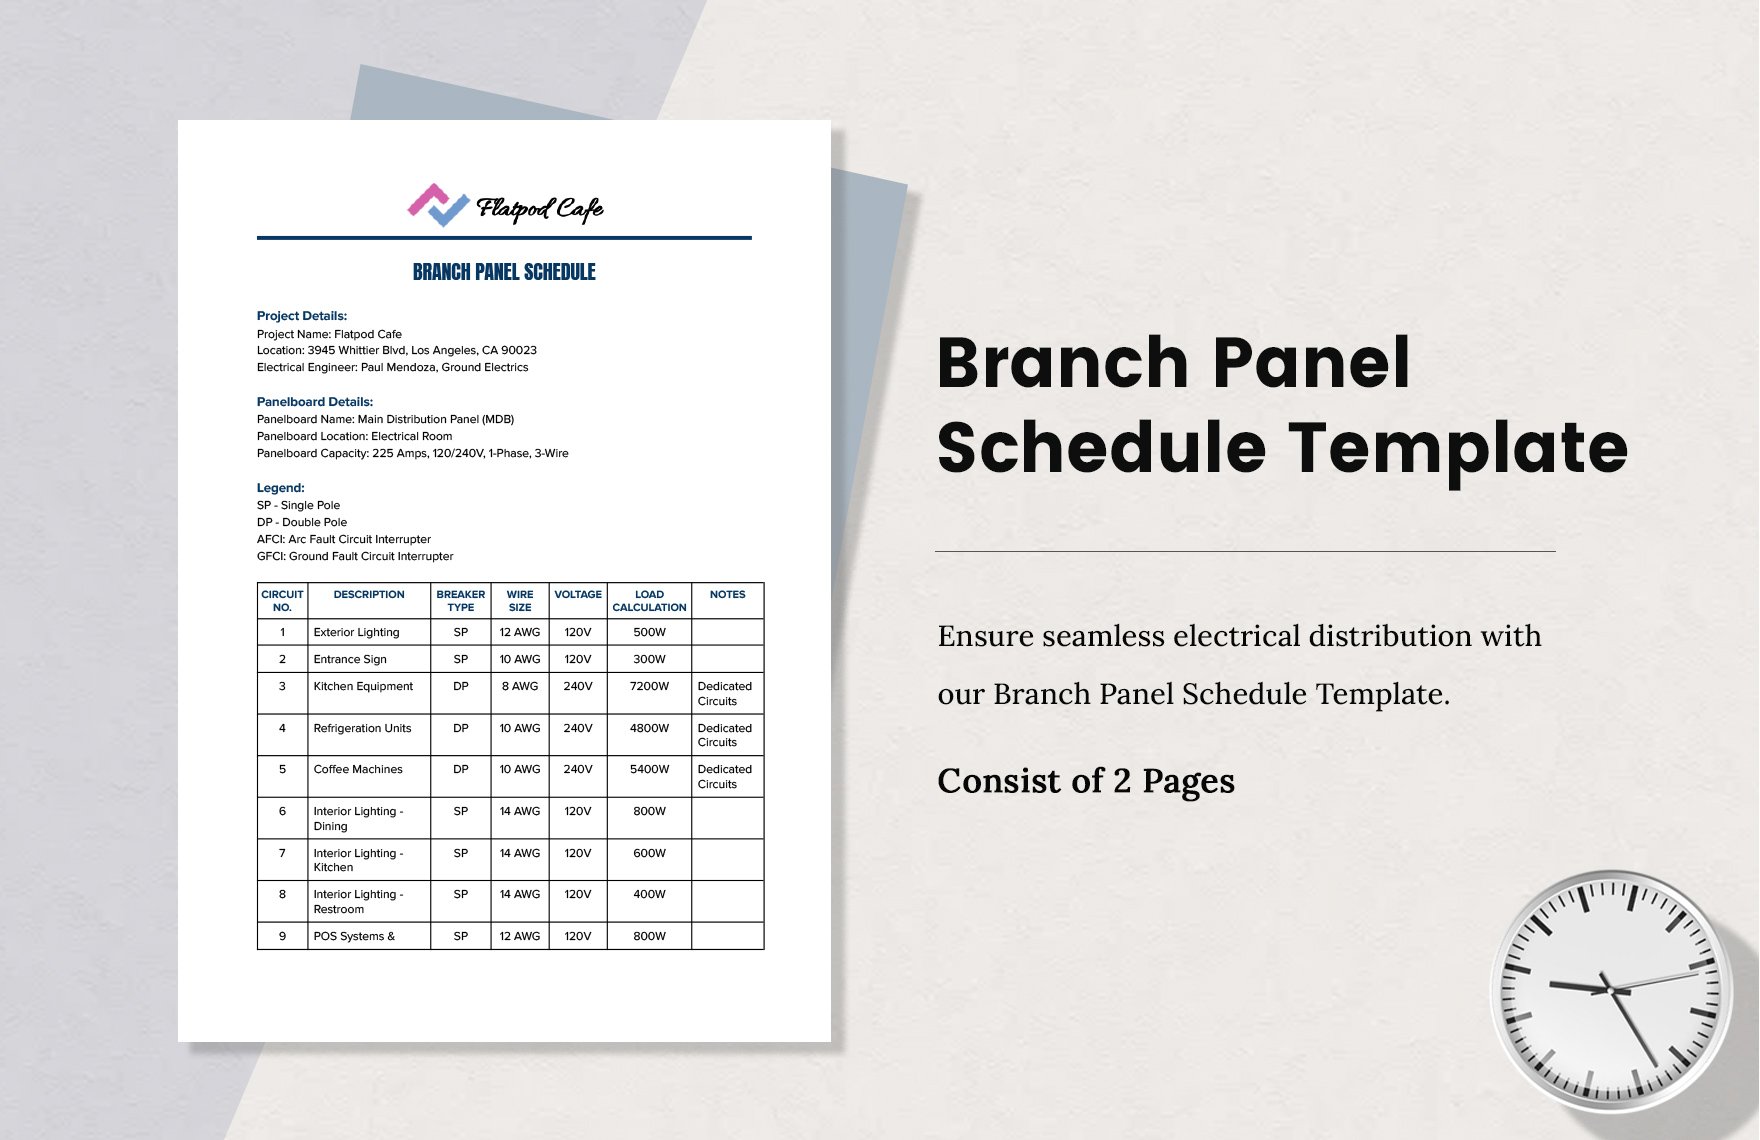 Branch Panel Schedule Template